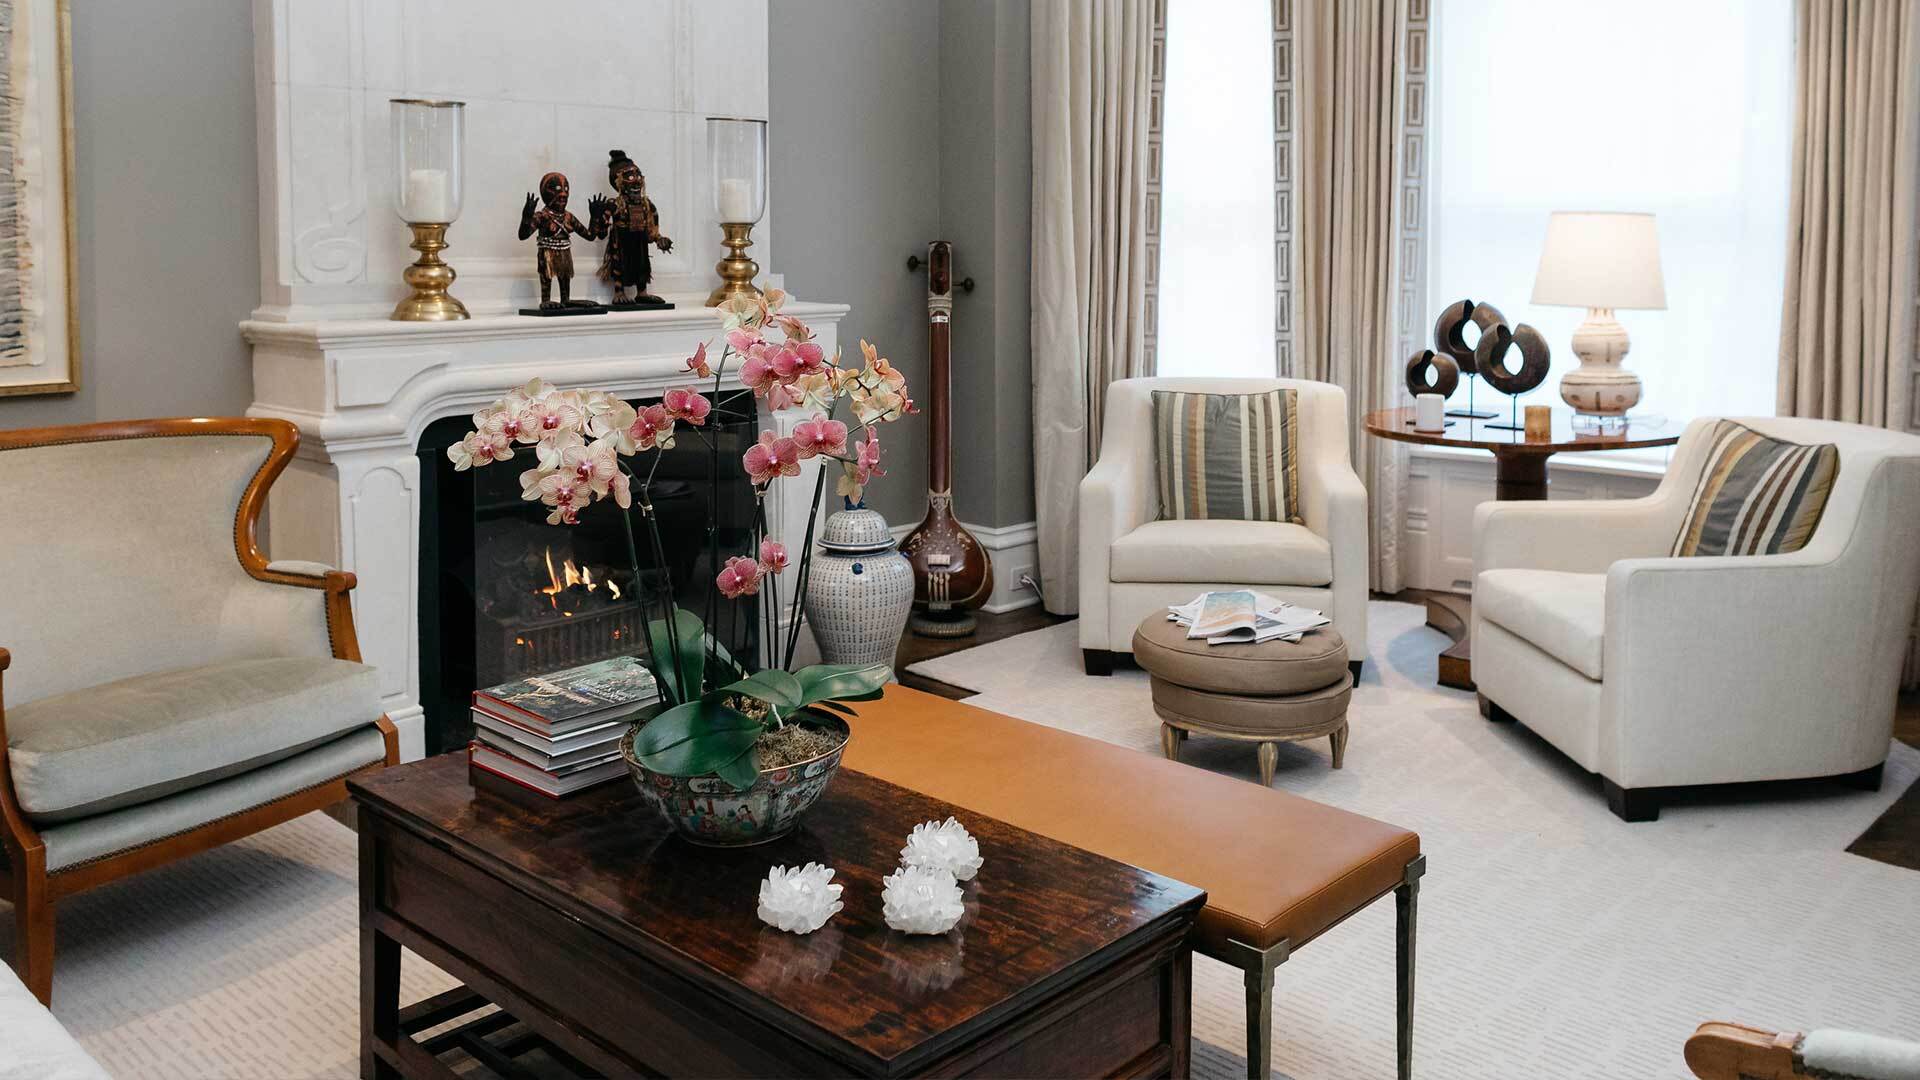 A photo of the living room of a well decorated, high-end apartment.